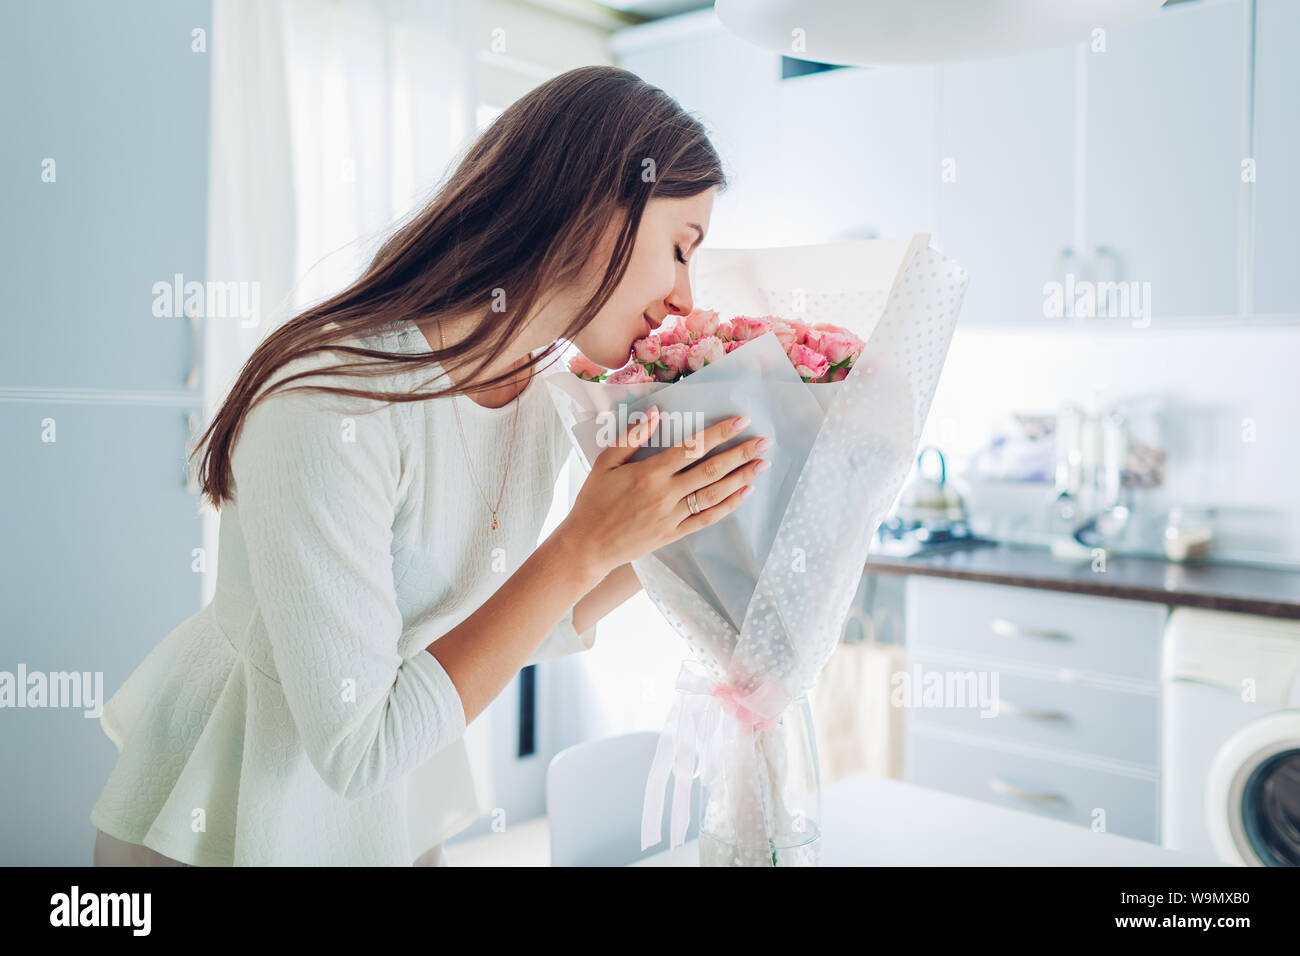 Happy woman smelling bouquet of roses. Housewife enjoying decor and interior of kitchen. Sweet home. Allergy free Stock Photo